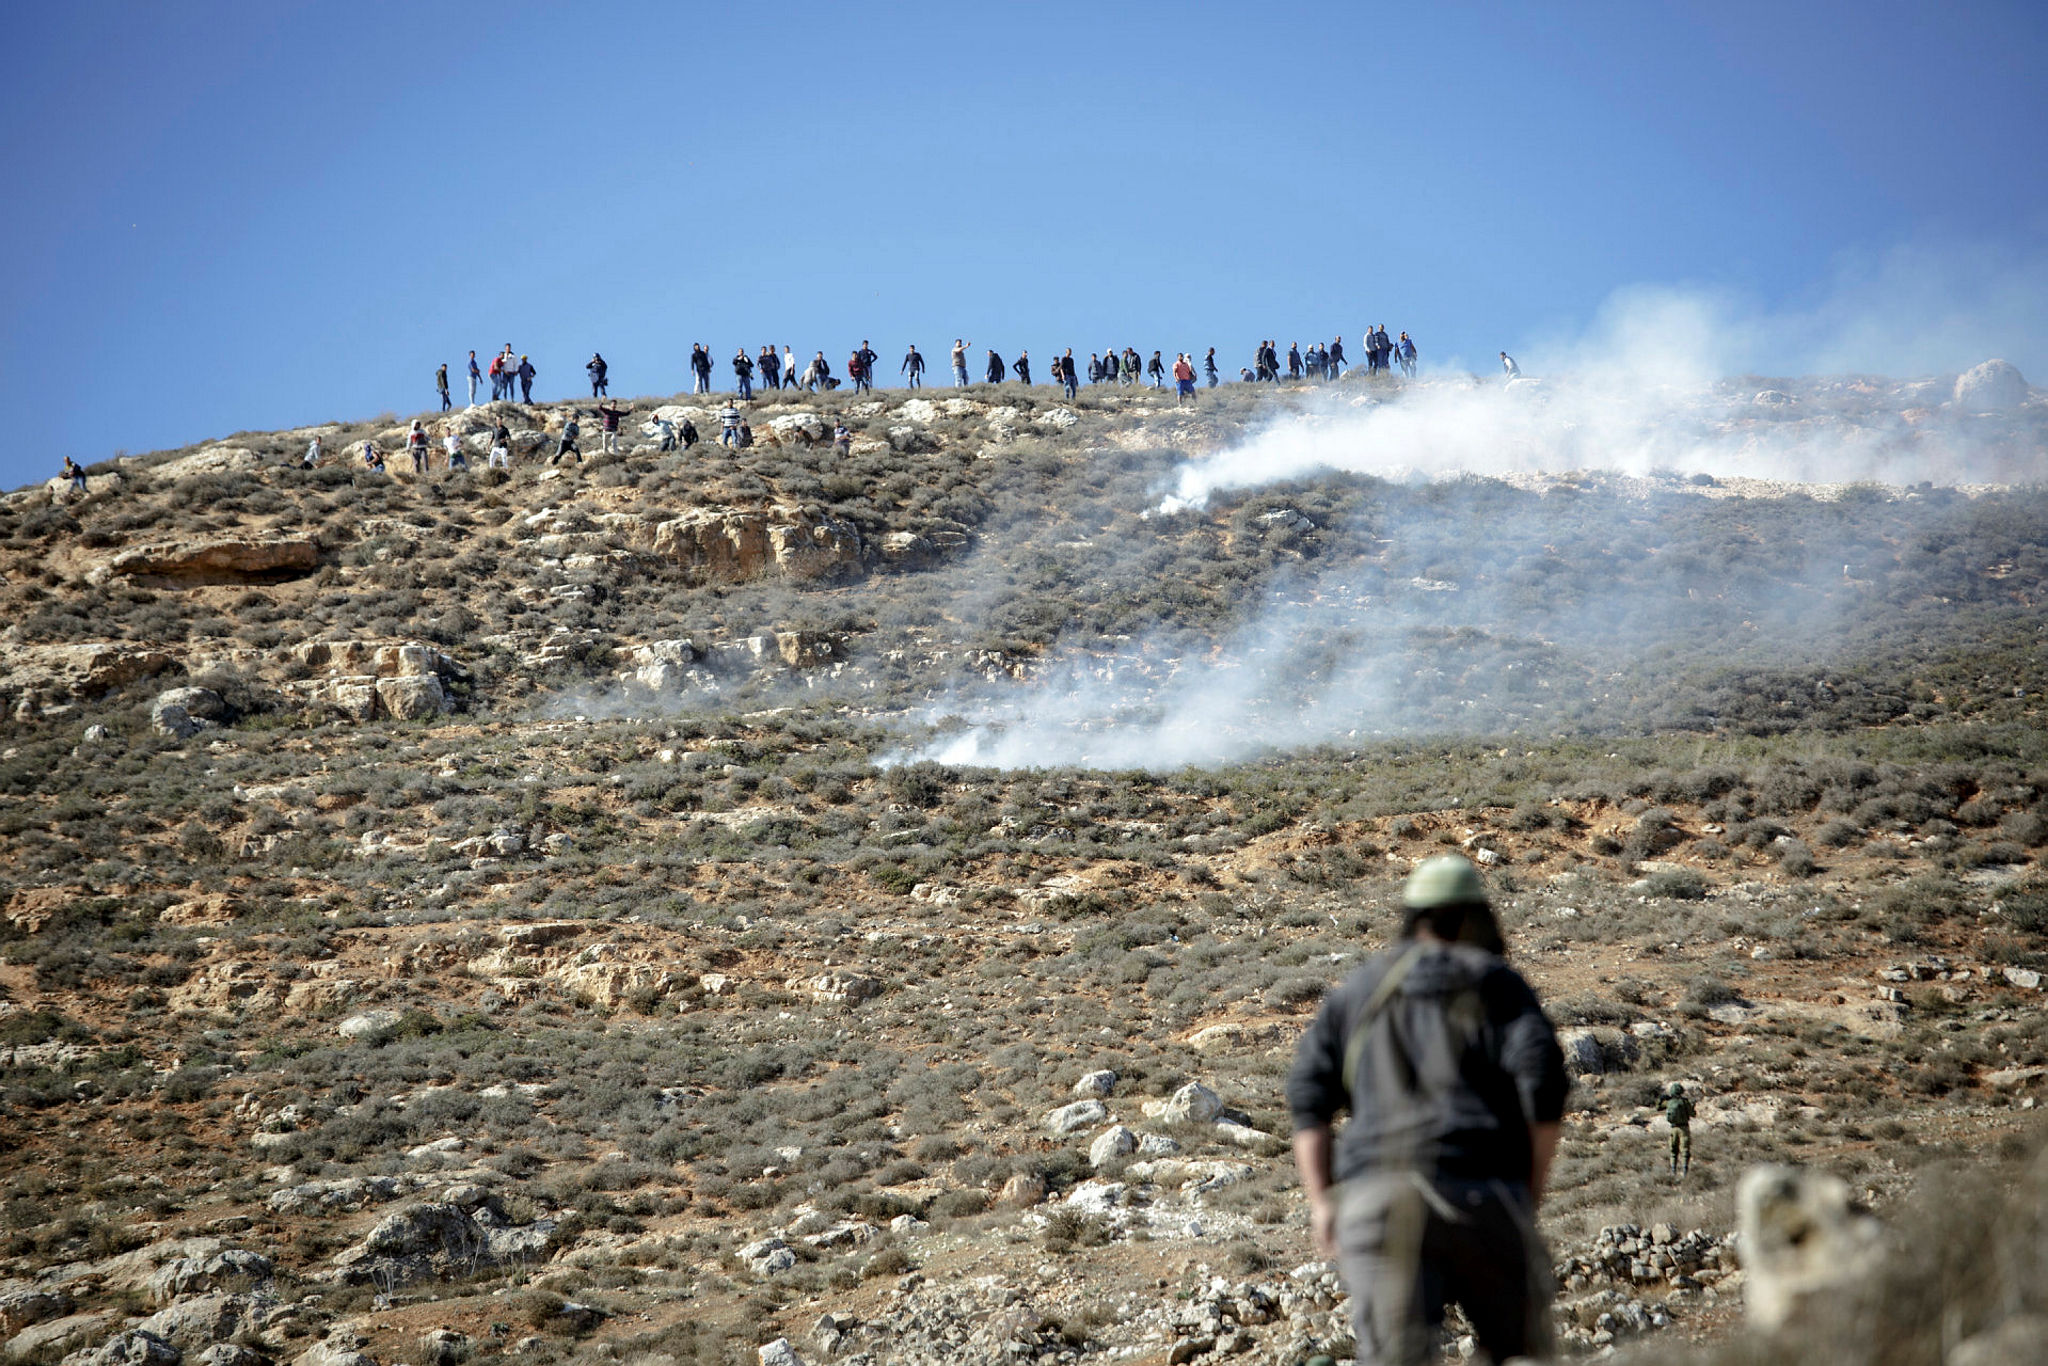 Palestinians throw stones at a group in Samaria